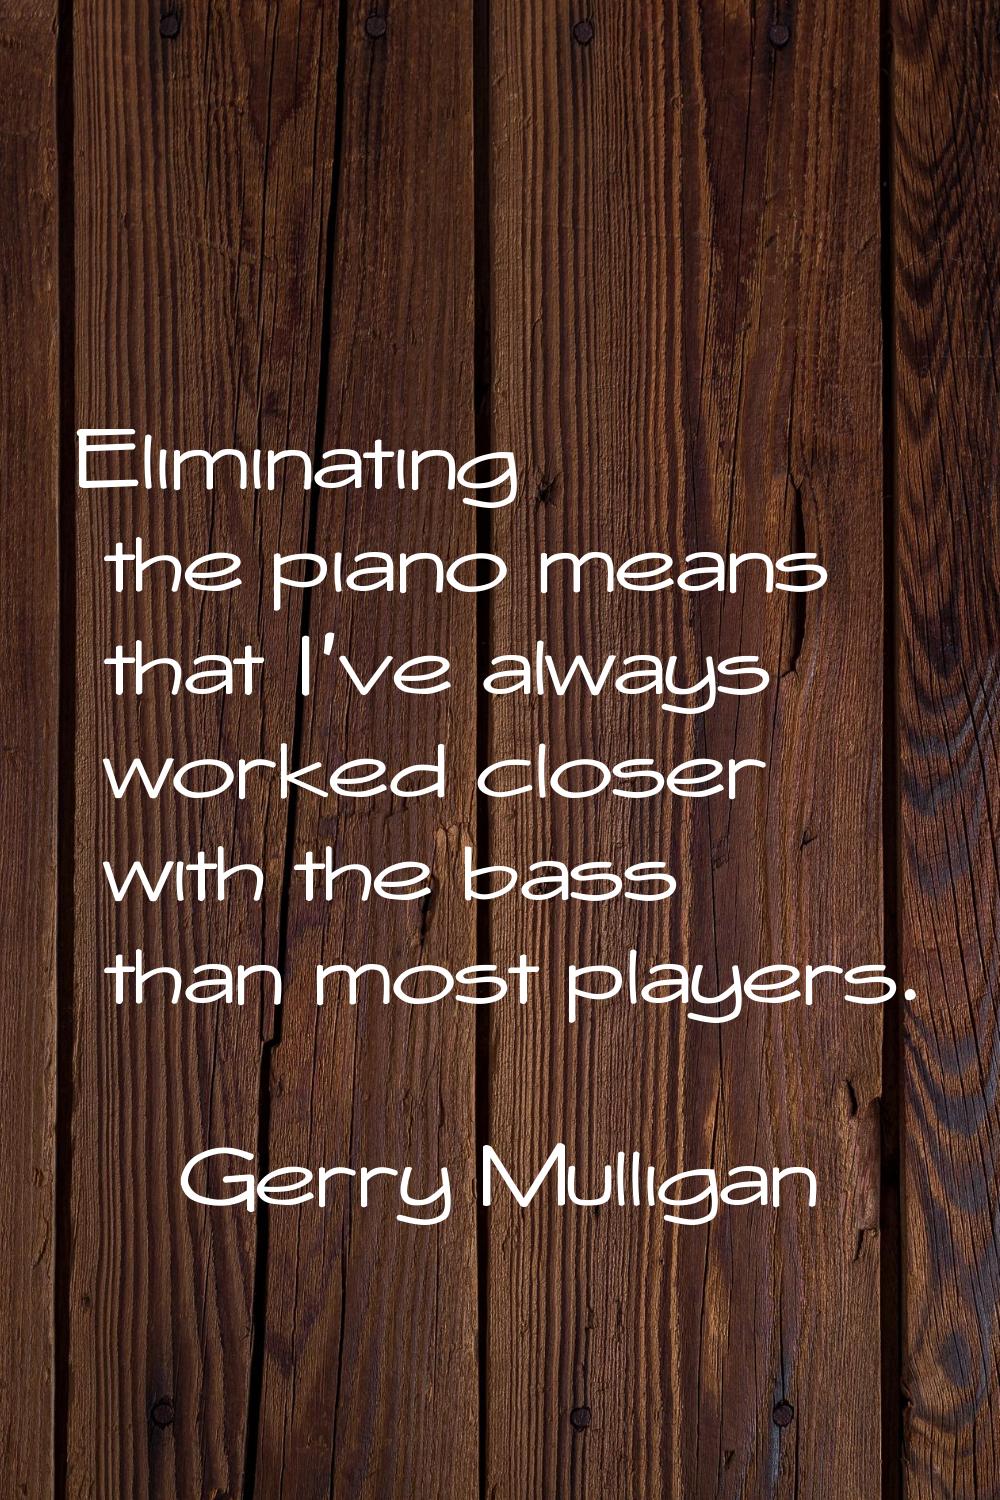 Eliminating the piano means that I've always worked closer with the bass than most players.